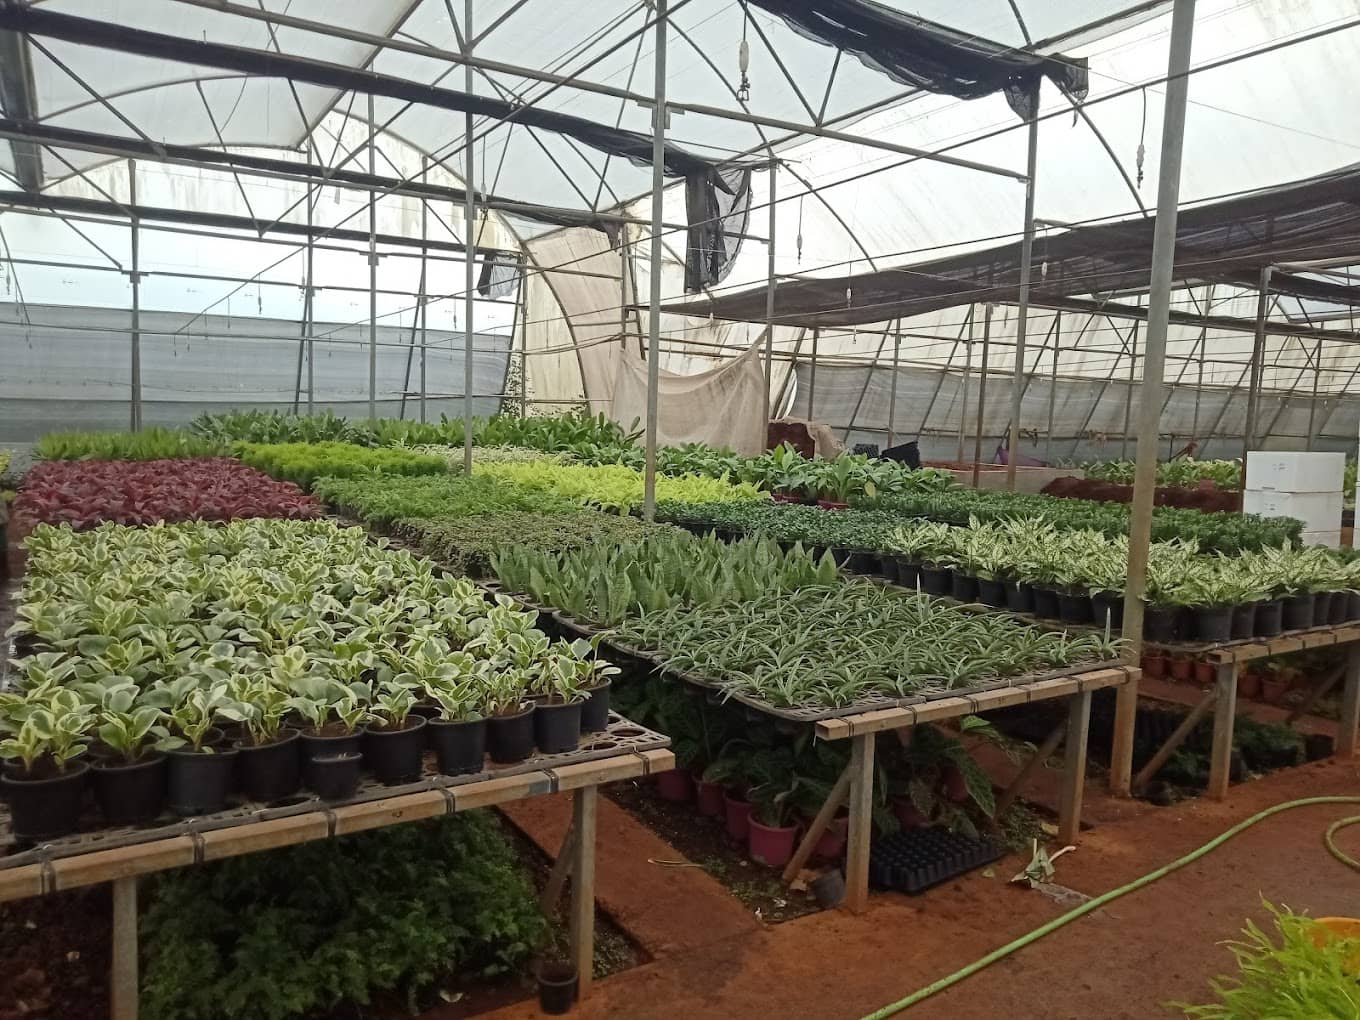 Different types of exotic flowers are grown at Greens and Blooms nursery